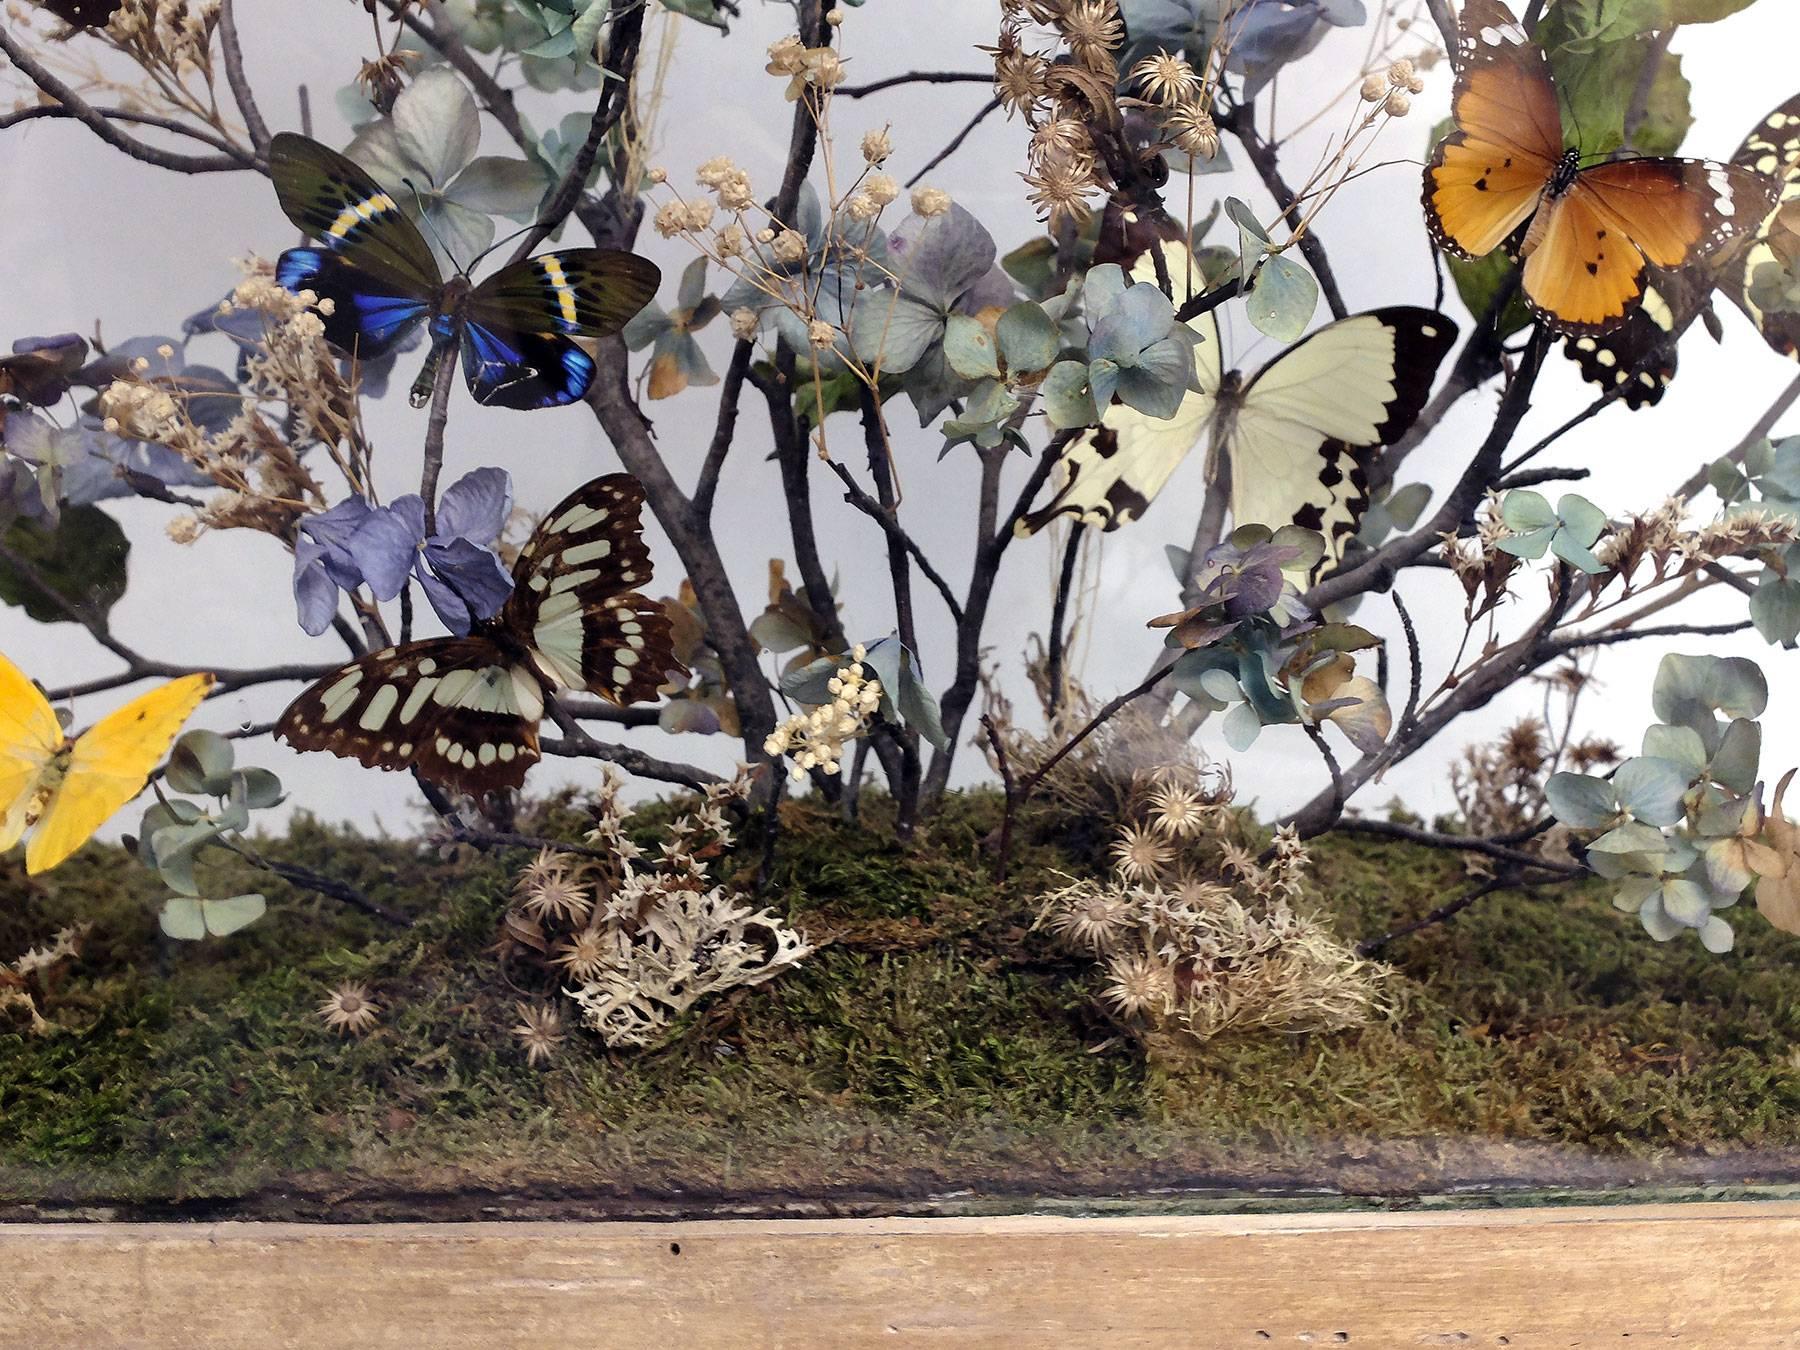 Late 19th Century Splendid and Unique Wunderkammer Diorama with Butterflies and Flowers